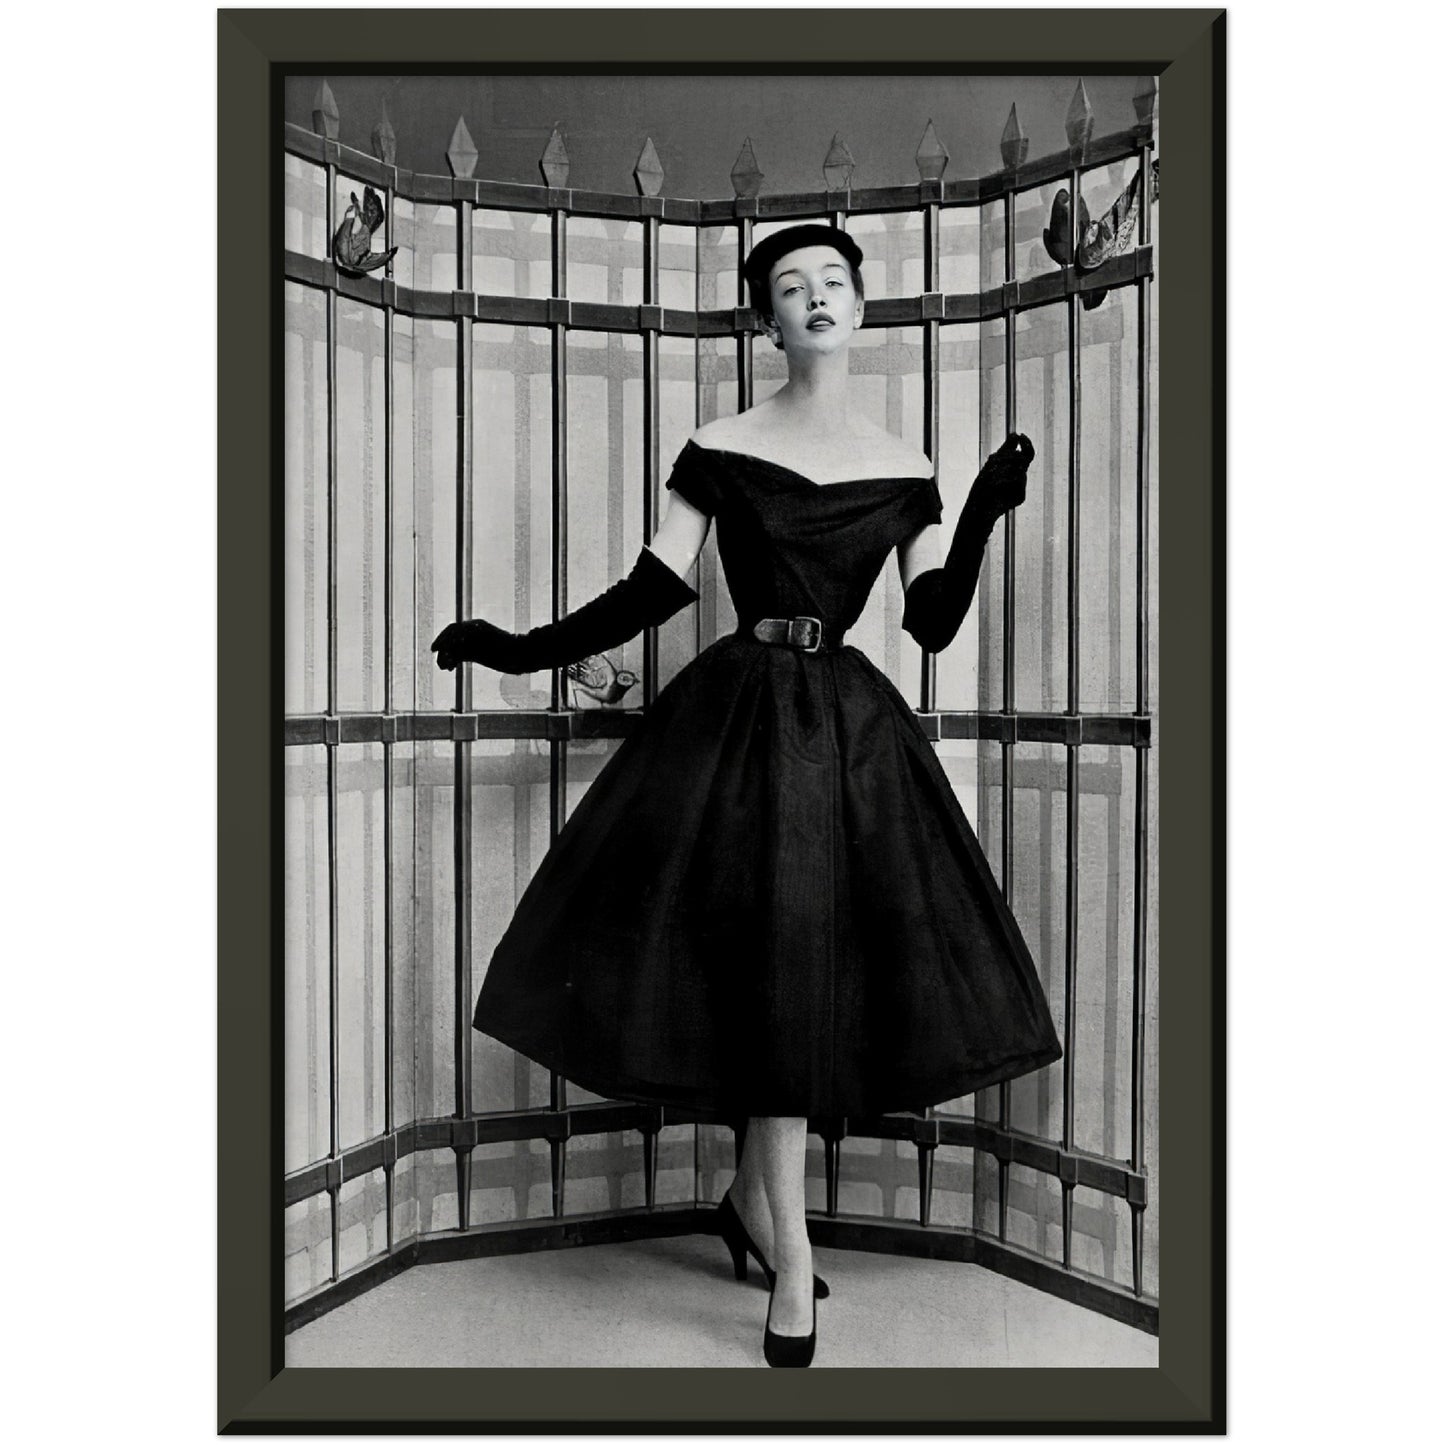 I Shall Be Free - Metal Framed Poster